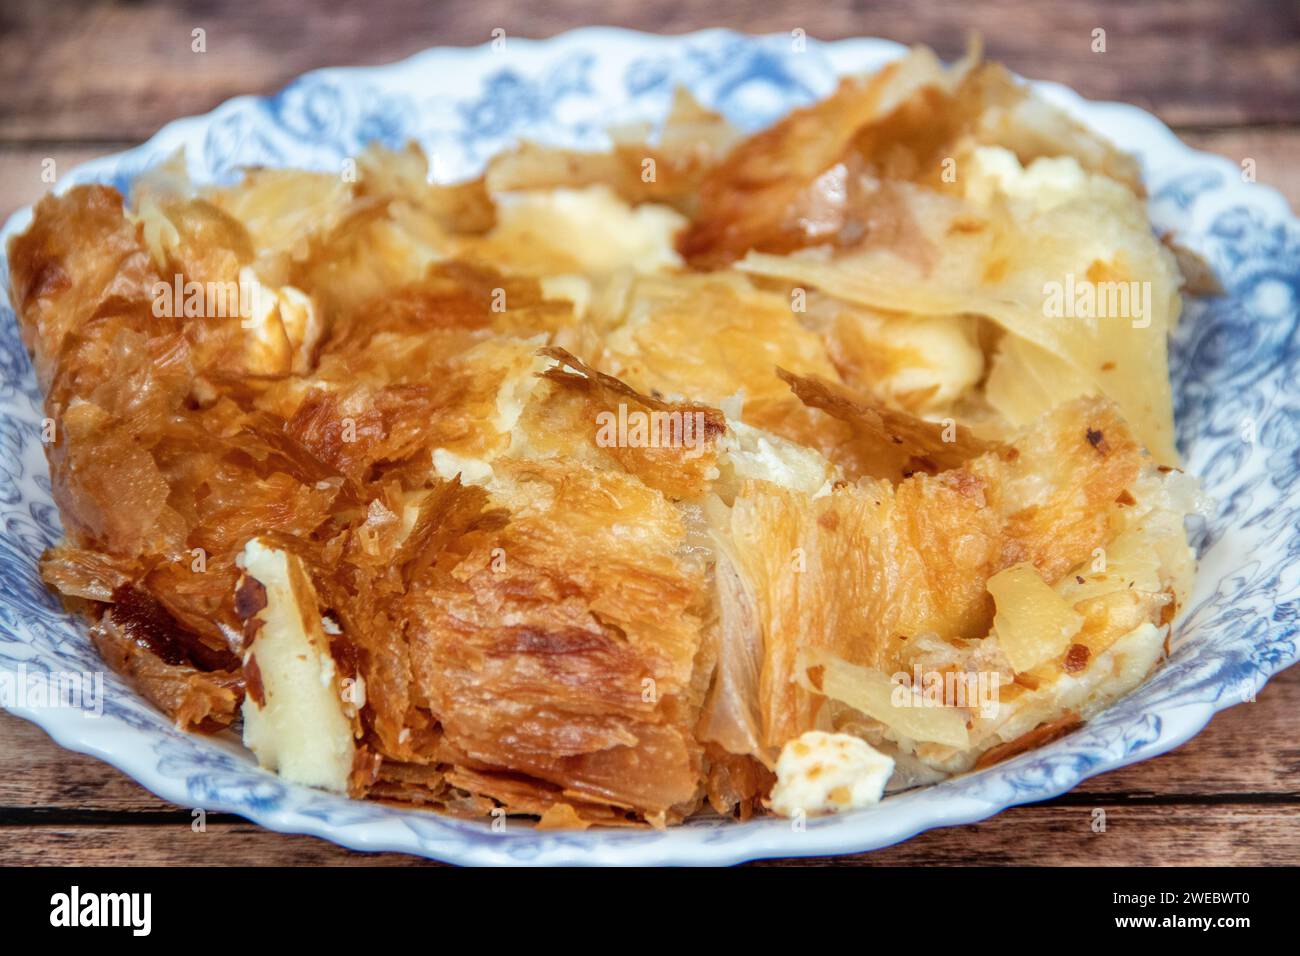 Serbian dish called Burek (cheese pie) served for breakfast at the plate with cutlery and fresh home made yogurt in cup Stock Photo